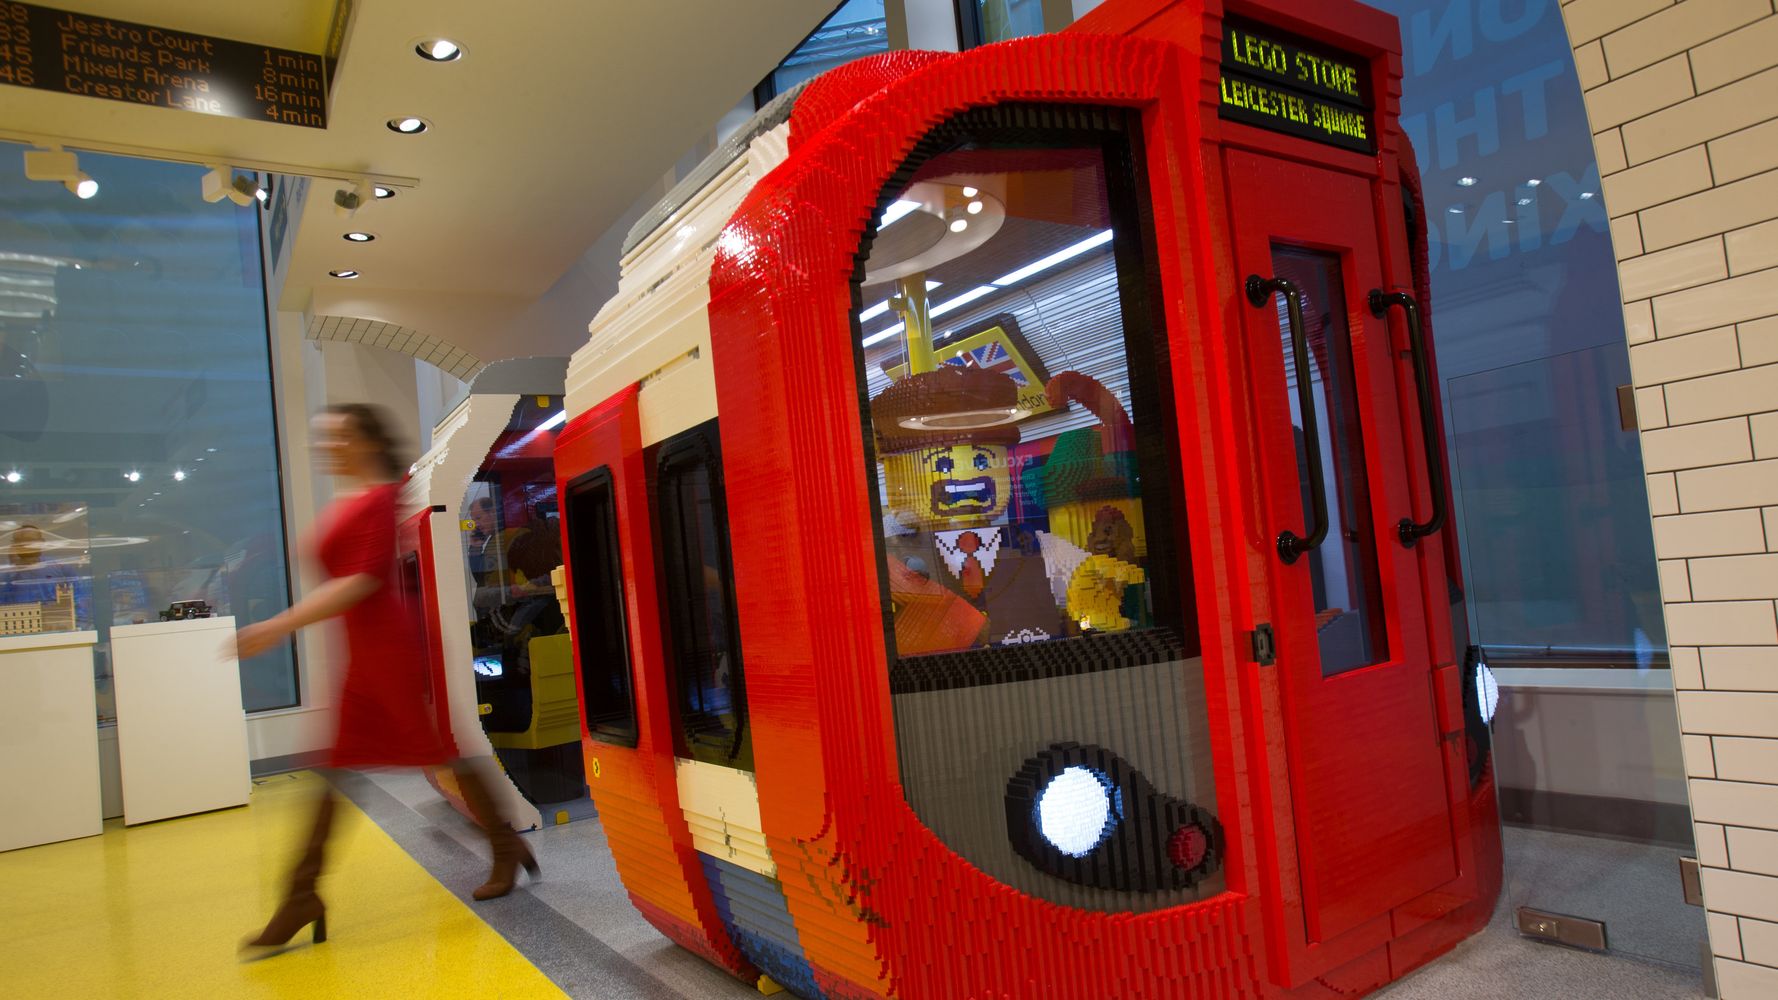 Visiting the World's Biggest Lego Store in Leicester Square on